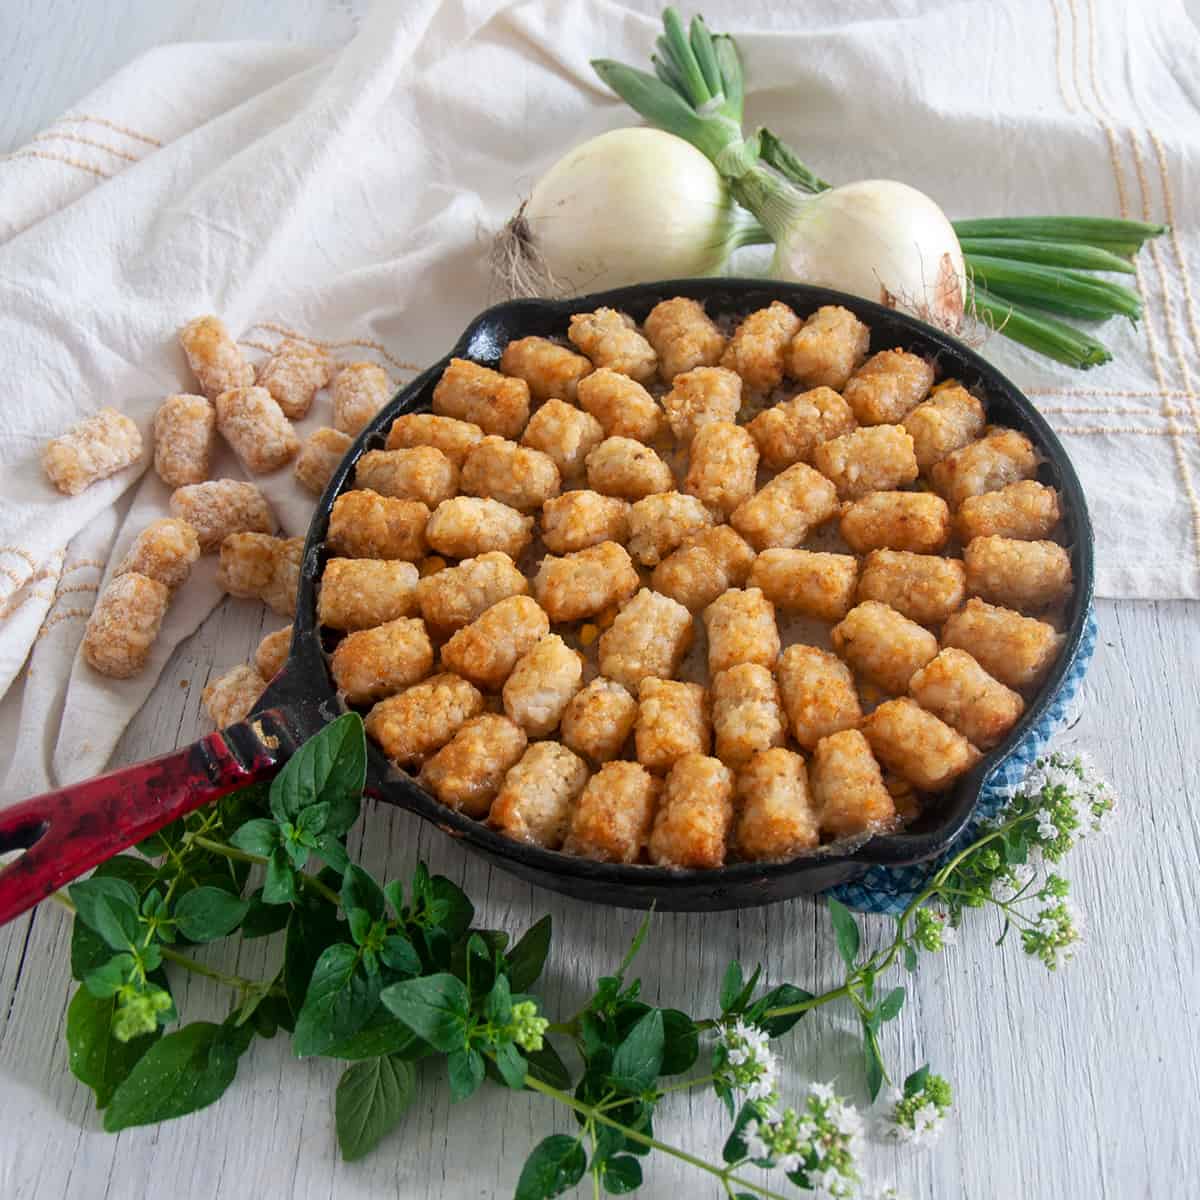 Cast iron tater tot hotdish on a wood table with some oregano.